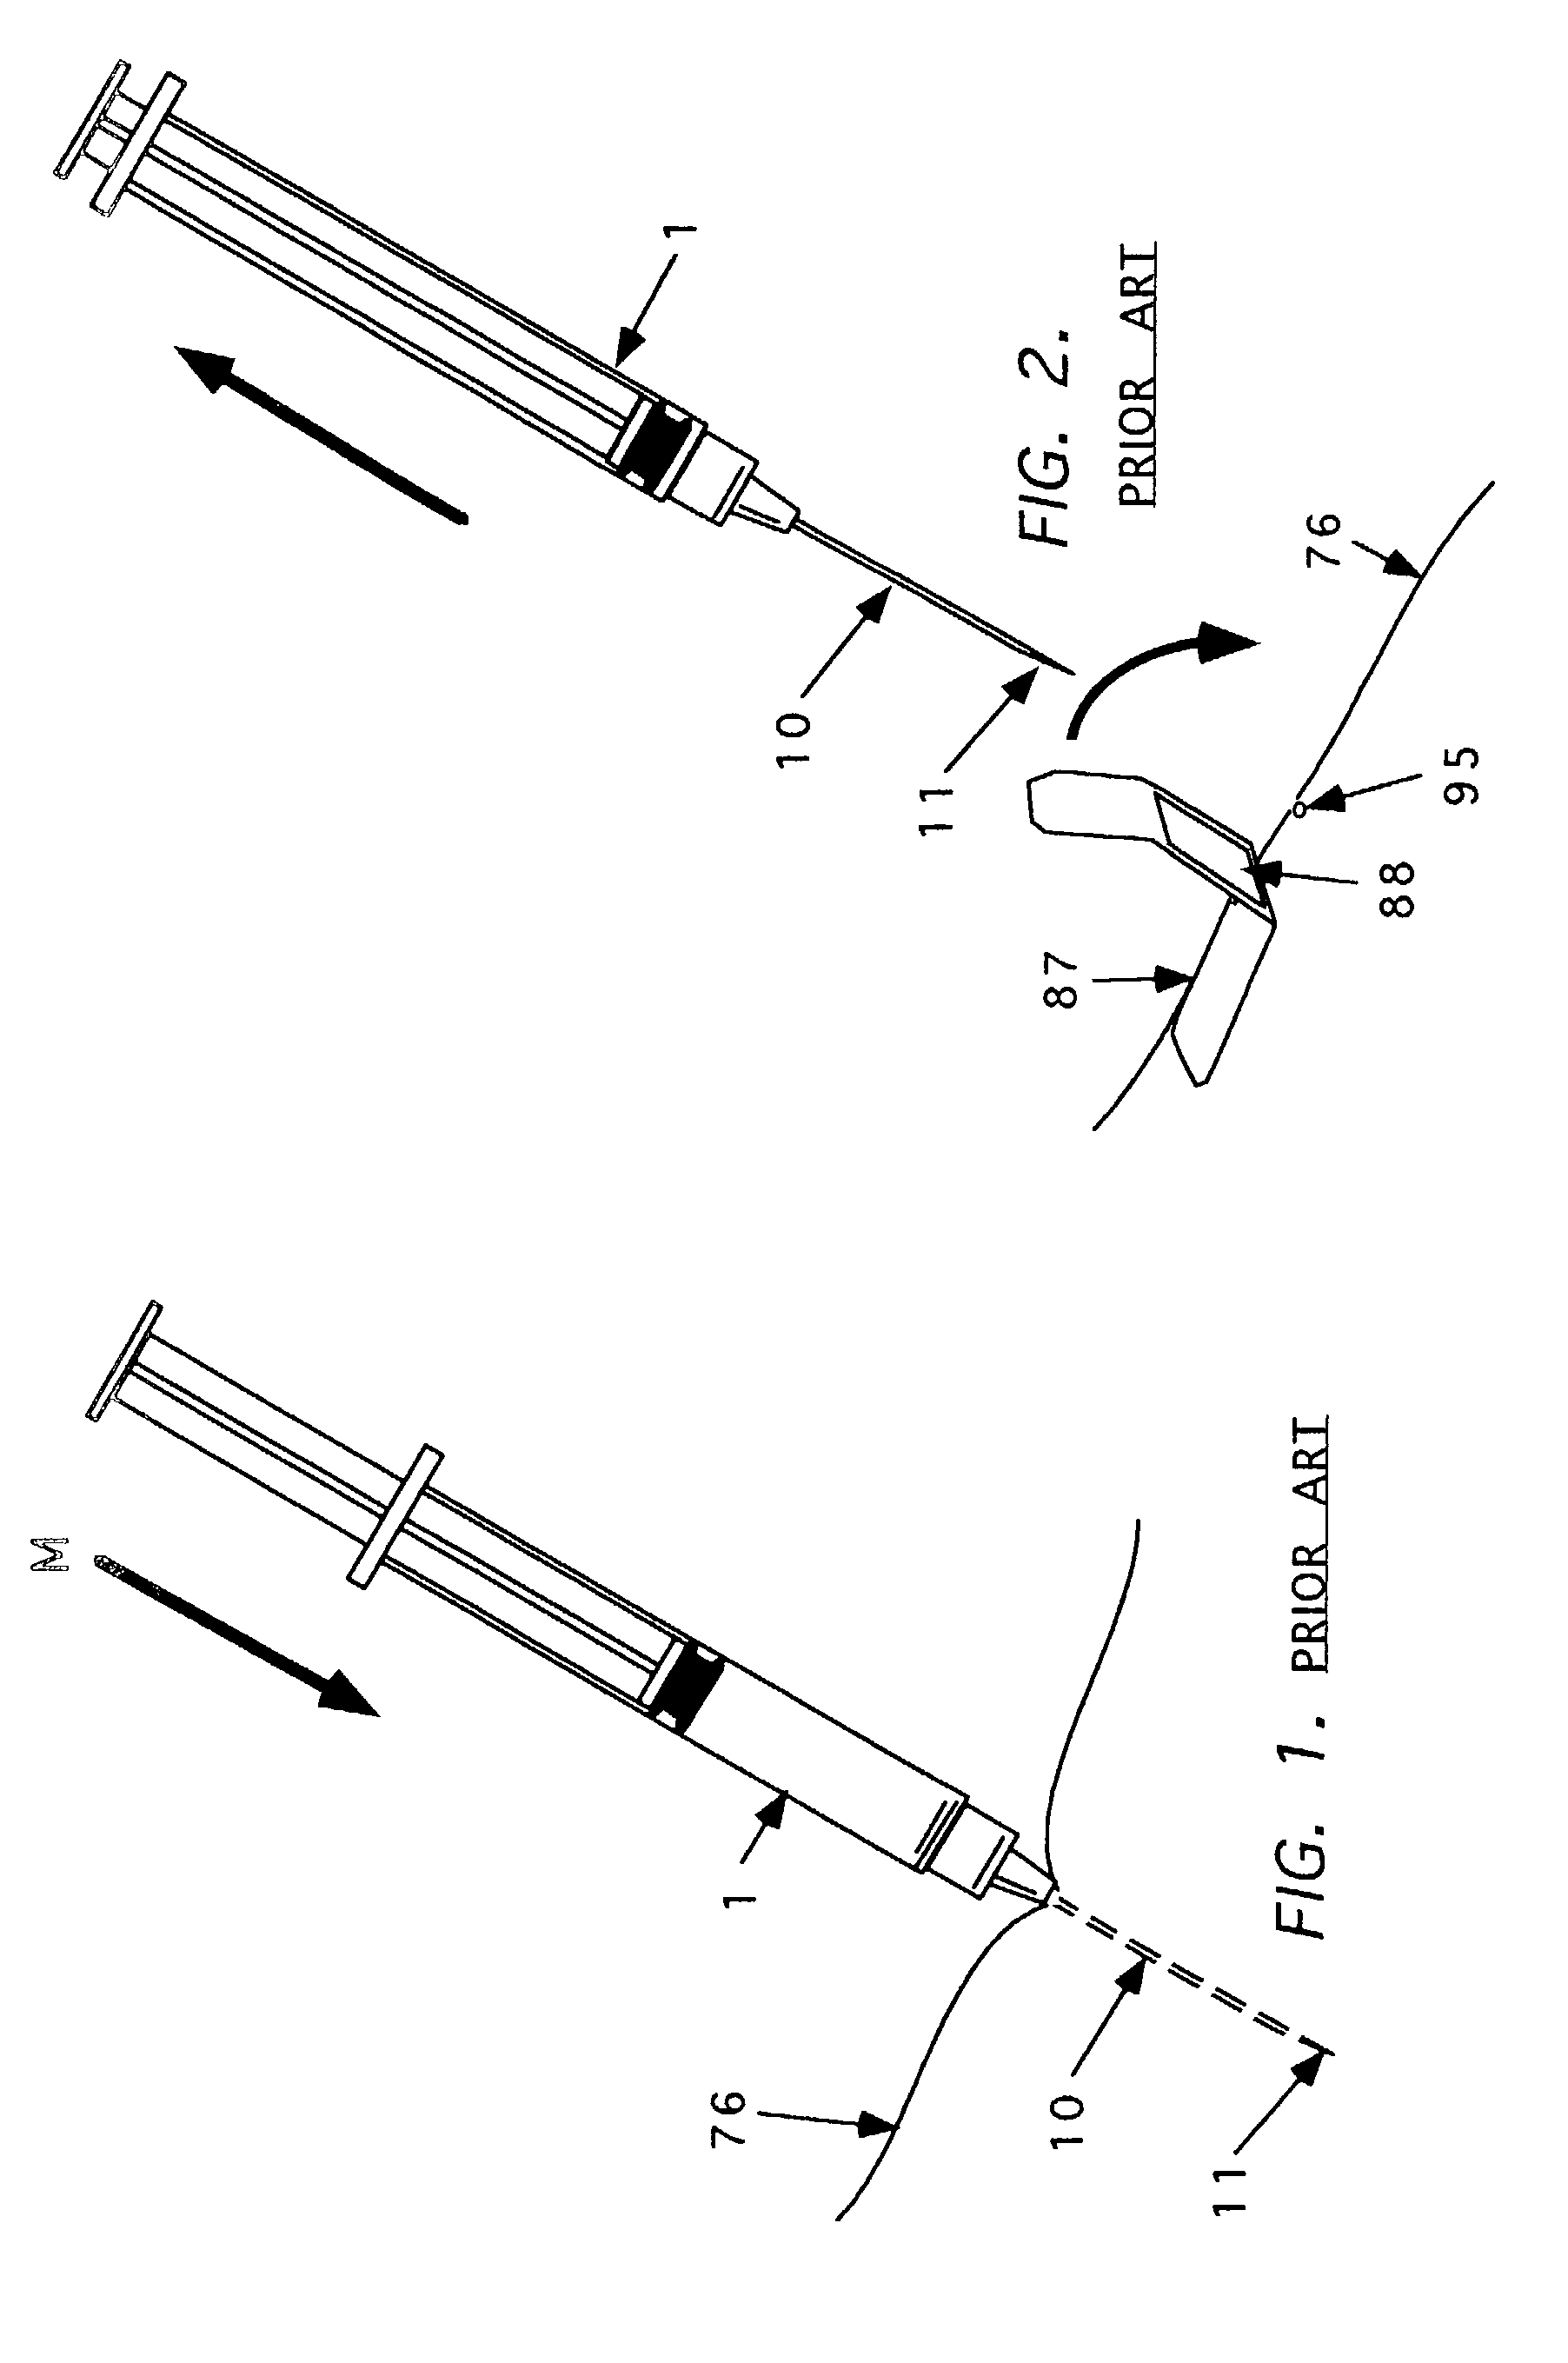 Method and apparatus for indicating or covering a percutaneous puncture site